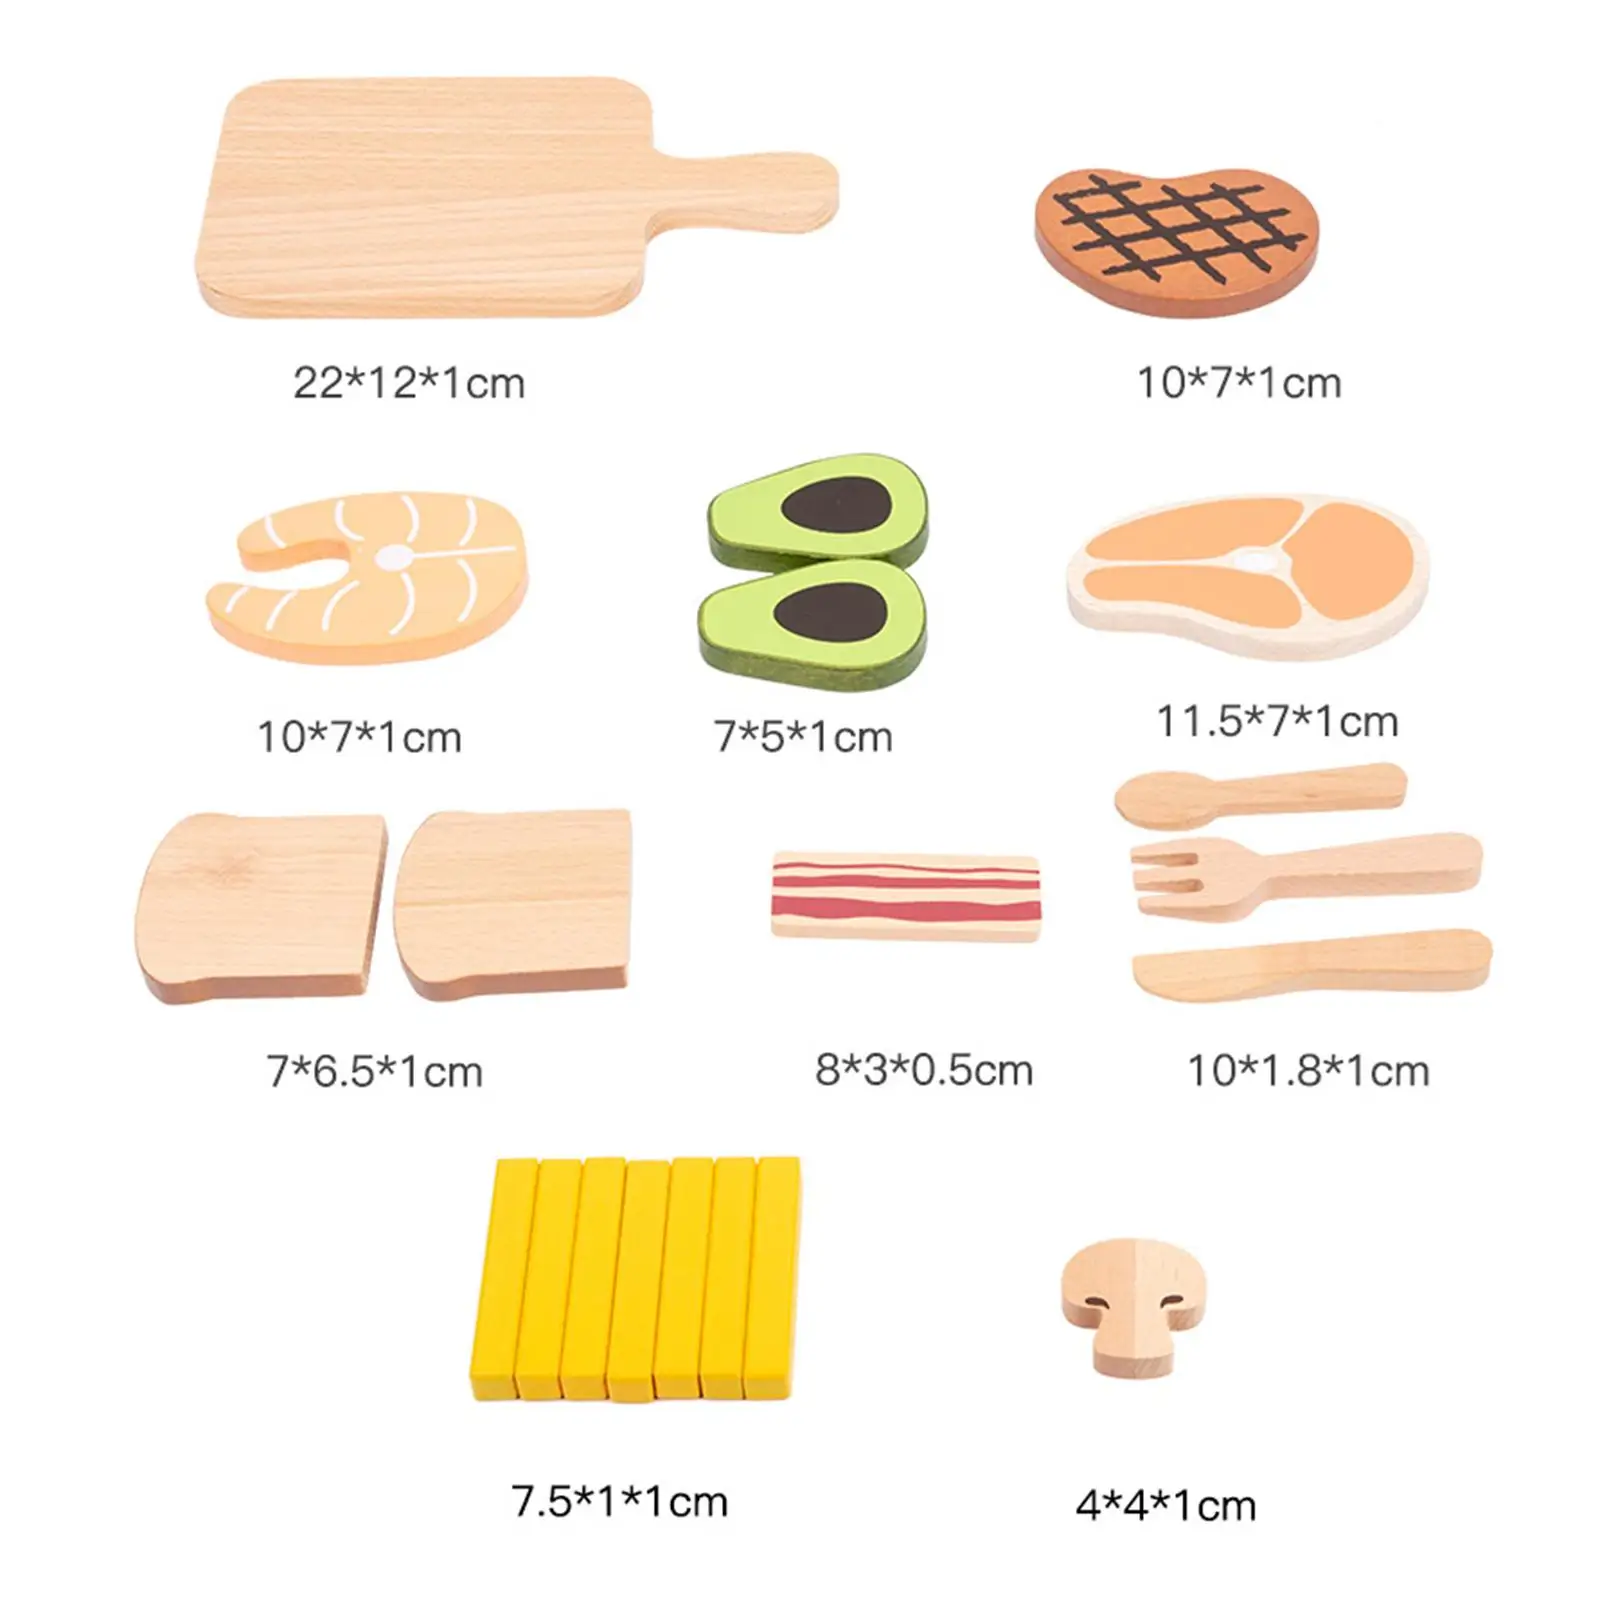 Toddlers Pretend Cooking Toys Preschool Wooden Play Food Set for DIY Model Furnishings Landscape Decorations Gift Handcraft